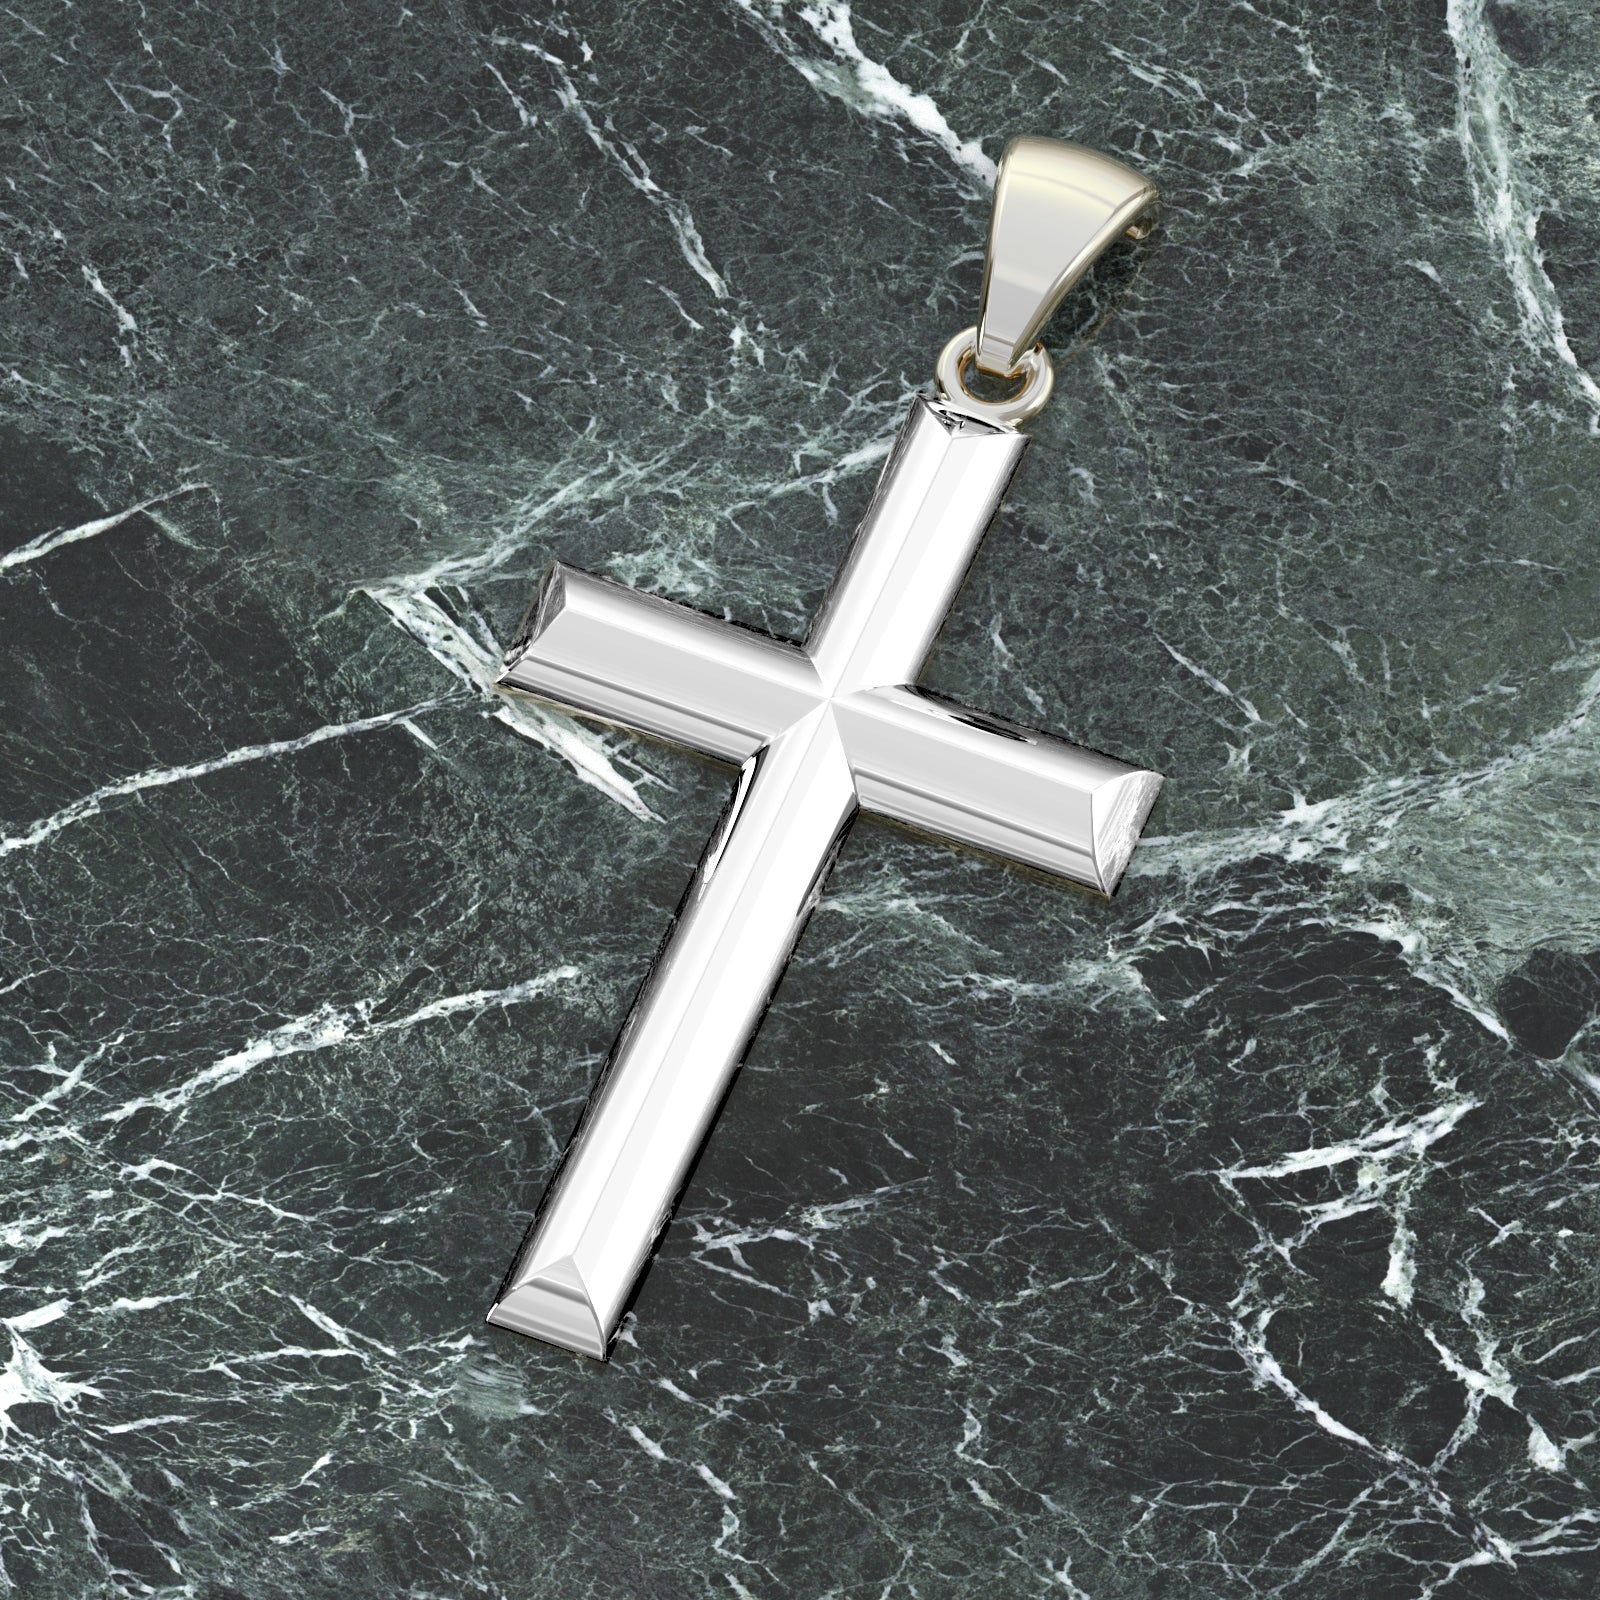 Ladies Solid 925 Sterling Silver High Polished Cross Pendant Necklace, 32mm - US Jewels